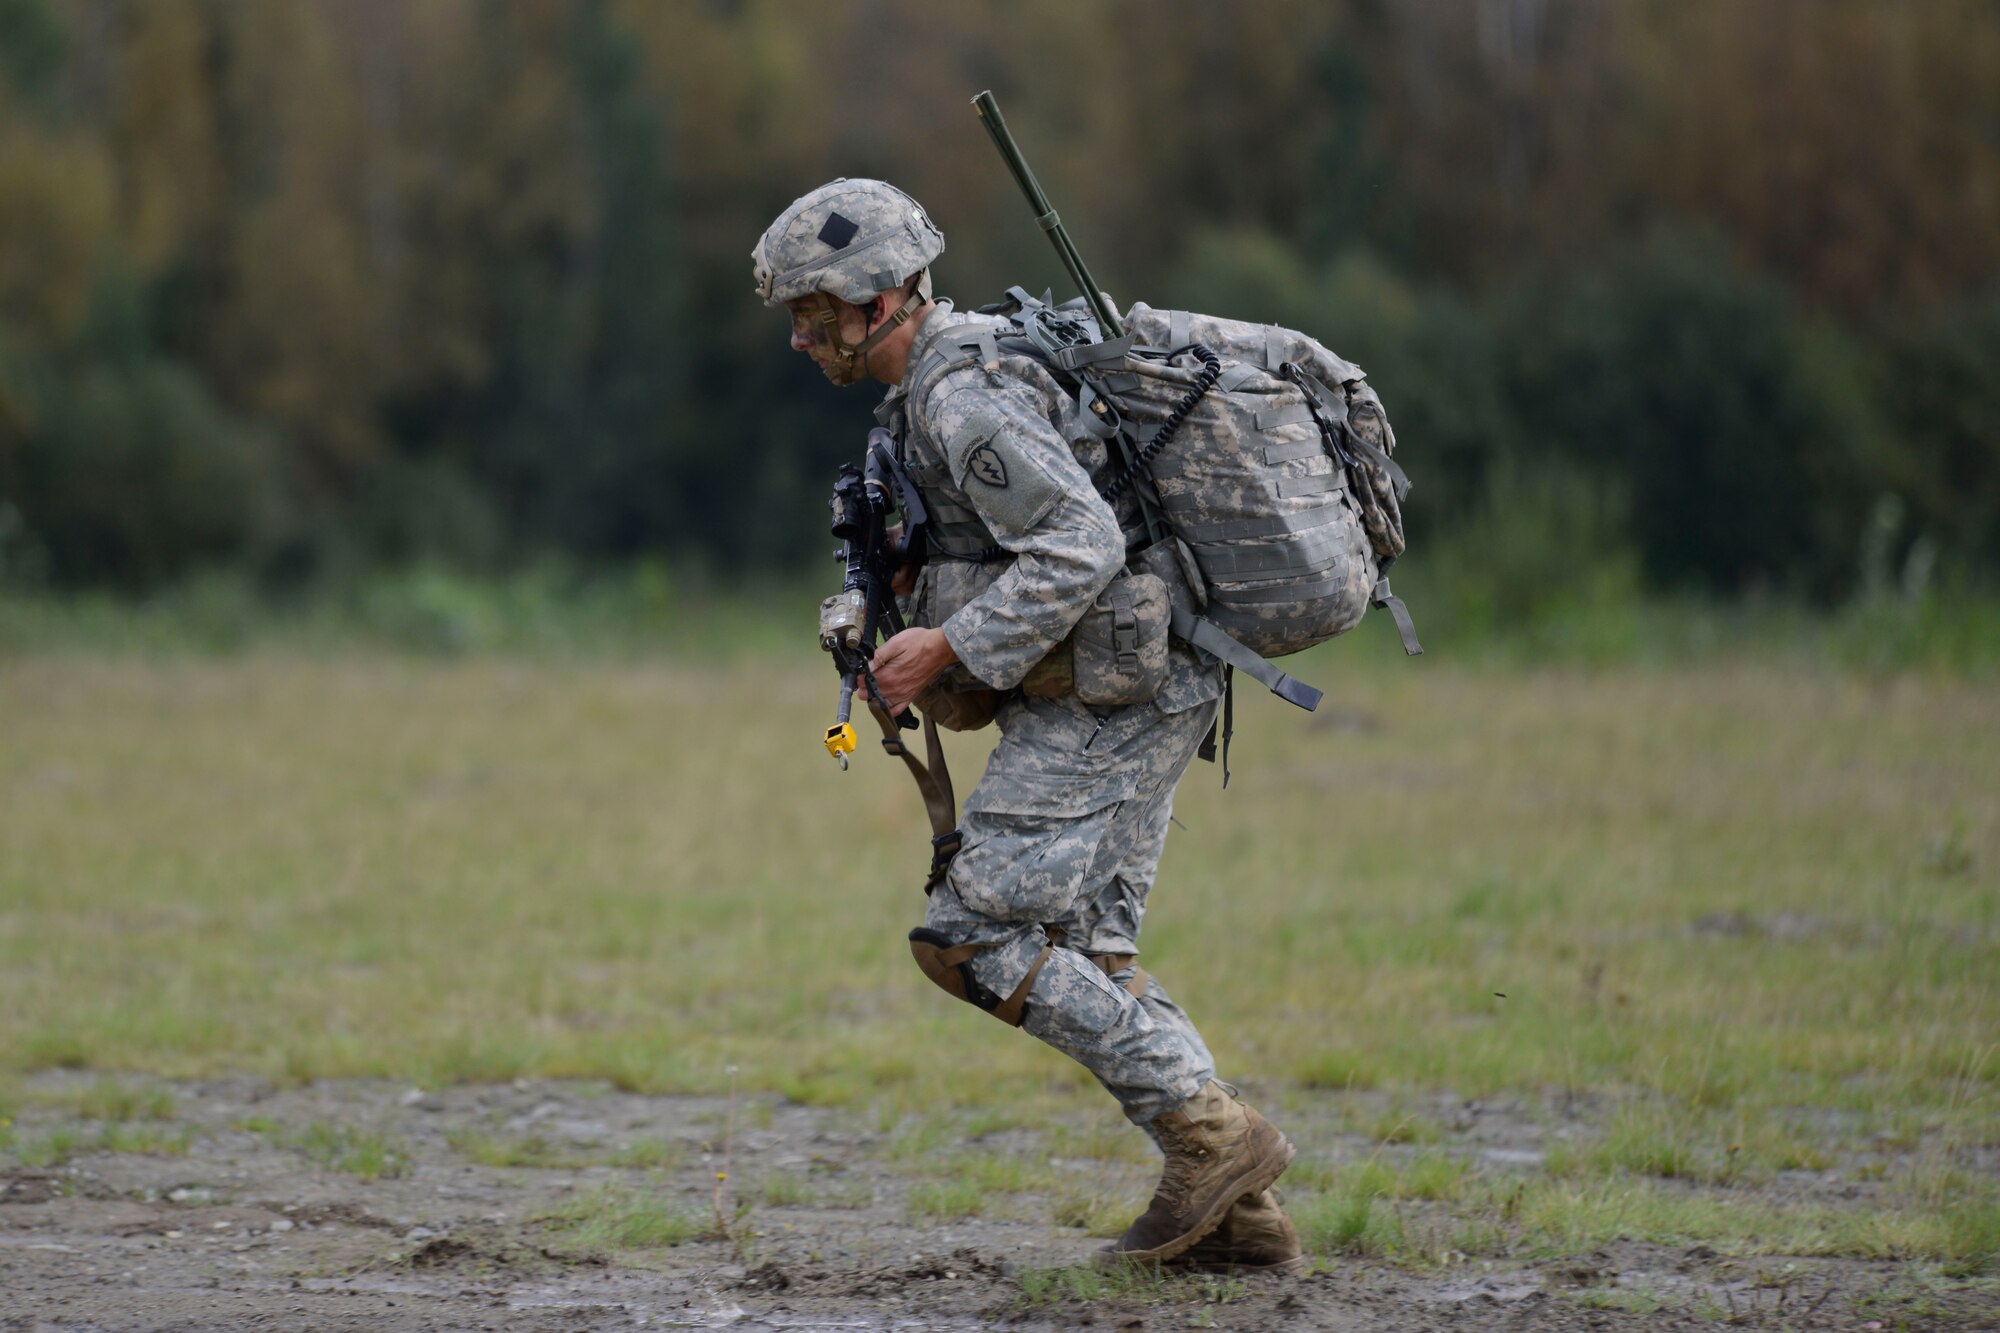 A paratrooper assigned to the1st Battalion, 501st Parachute Infantry Regiment,4th Infantry Brigade Combat Team (Airborne), 25th Infantry Division, U.S. Army Alaska, participates in a joint forcible entry exercise at Malemute Drop Zone on Joint Base Elmendorf-Richardson, Alaska, Aug. 23, 2016, as part of Exercise Spartan Agoge. Spartan Agoge is a brigade-level field training exercise that began Aug. 15, and focuses on an array of combat-related tasks from squad live-fire exercises to helicopter air insertion and airborne assault training. (U.S. Air Force photo by Airman 1st Class Valerie Monroy)